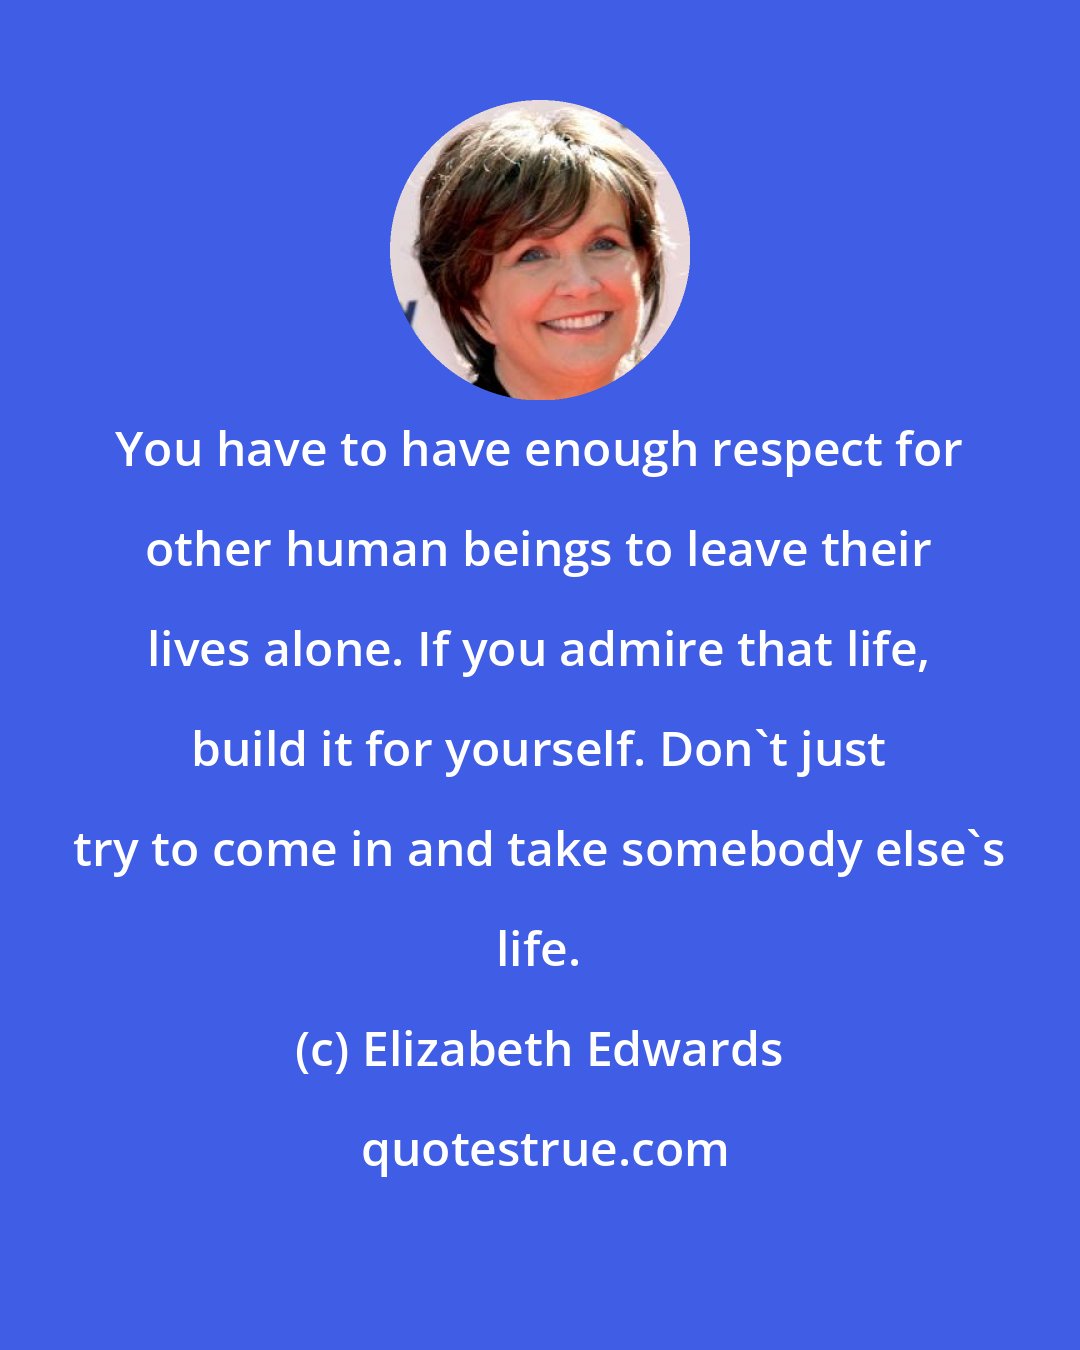 Elizabeth Edwards: You have to have enough respect for other human beings to leave their lives alone. If you admire that life, build it for yourself. Don't just try to come in and take somebody else's life.